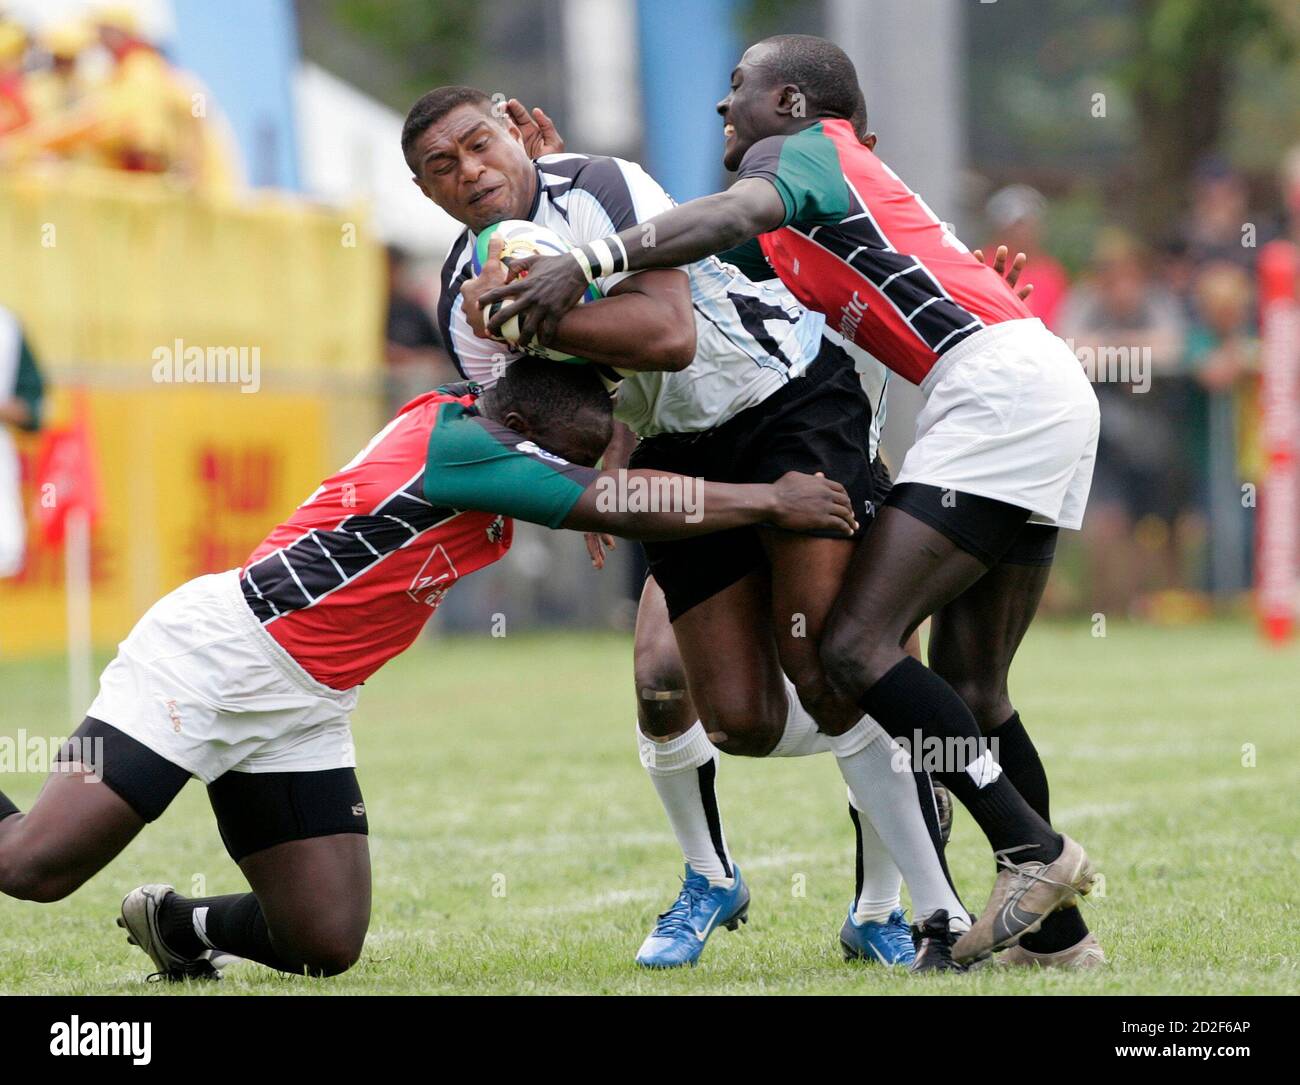 Fiji's Etonia Nalibu (C) is tackled by Kenya's Collins Injera (R) during their IRB World Rugby Sevens series quater-final match in George December 8, 2007.  REUTERS/Howard Burditt (SOUTH AFRICA) Stock Photo